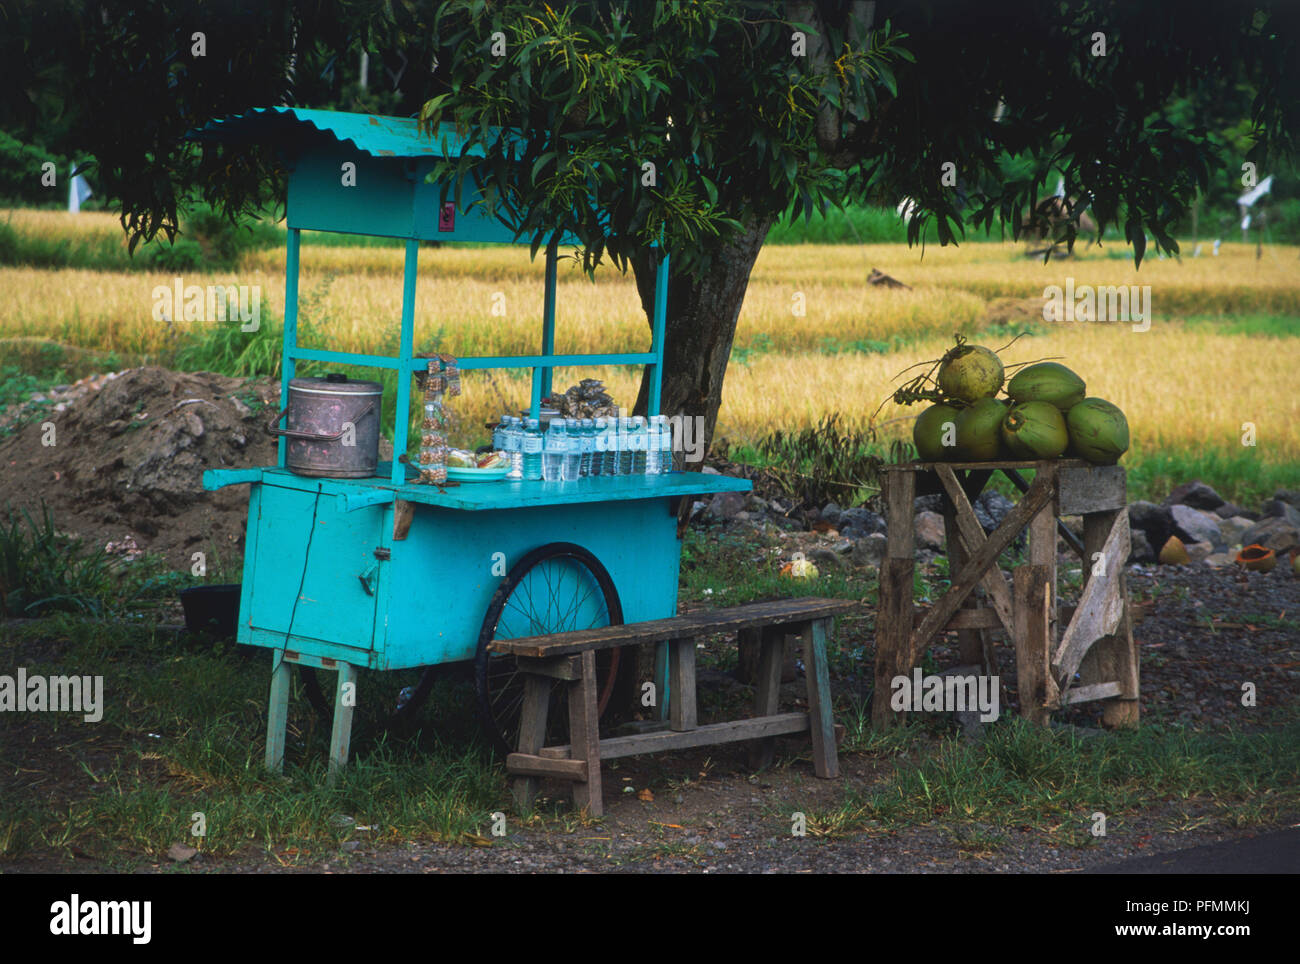 Indonesia, East Bali, near Candi Dasa, road-side food stall selling water and fruit. Stock Photo